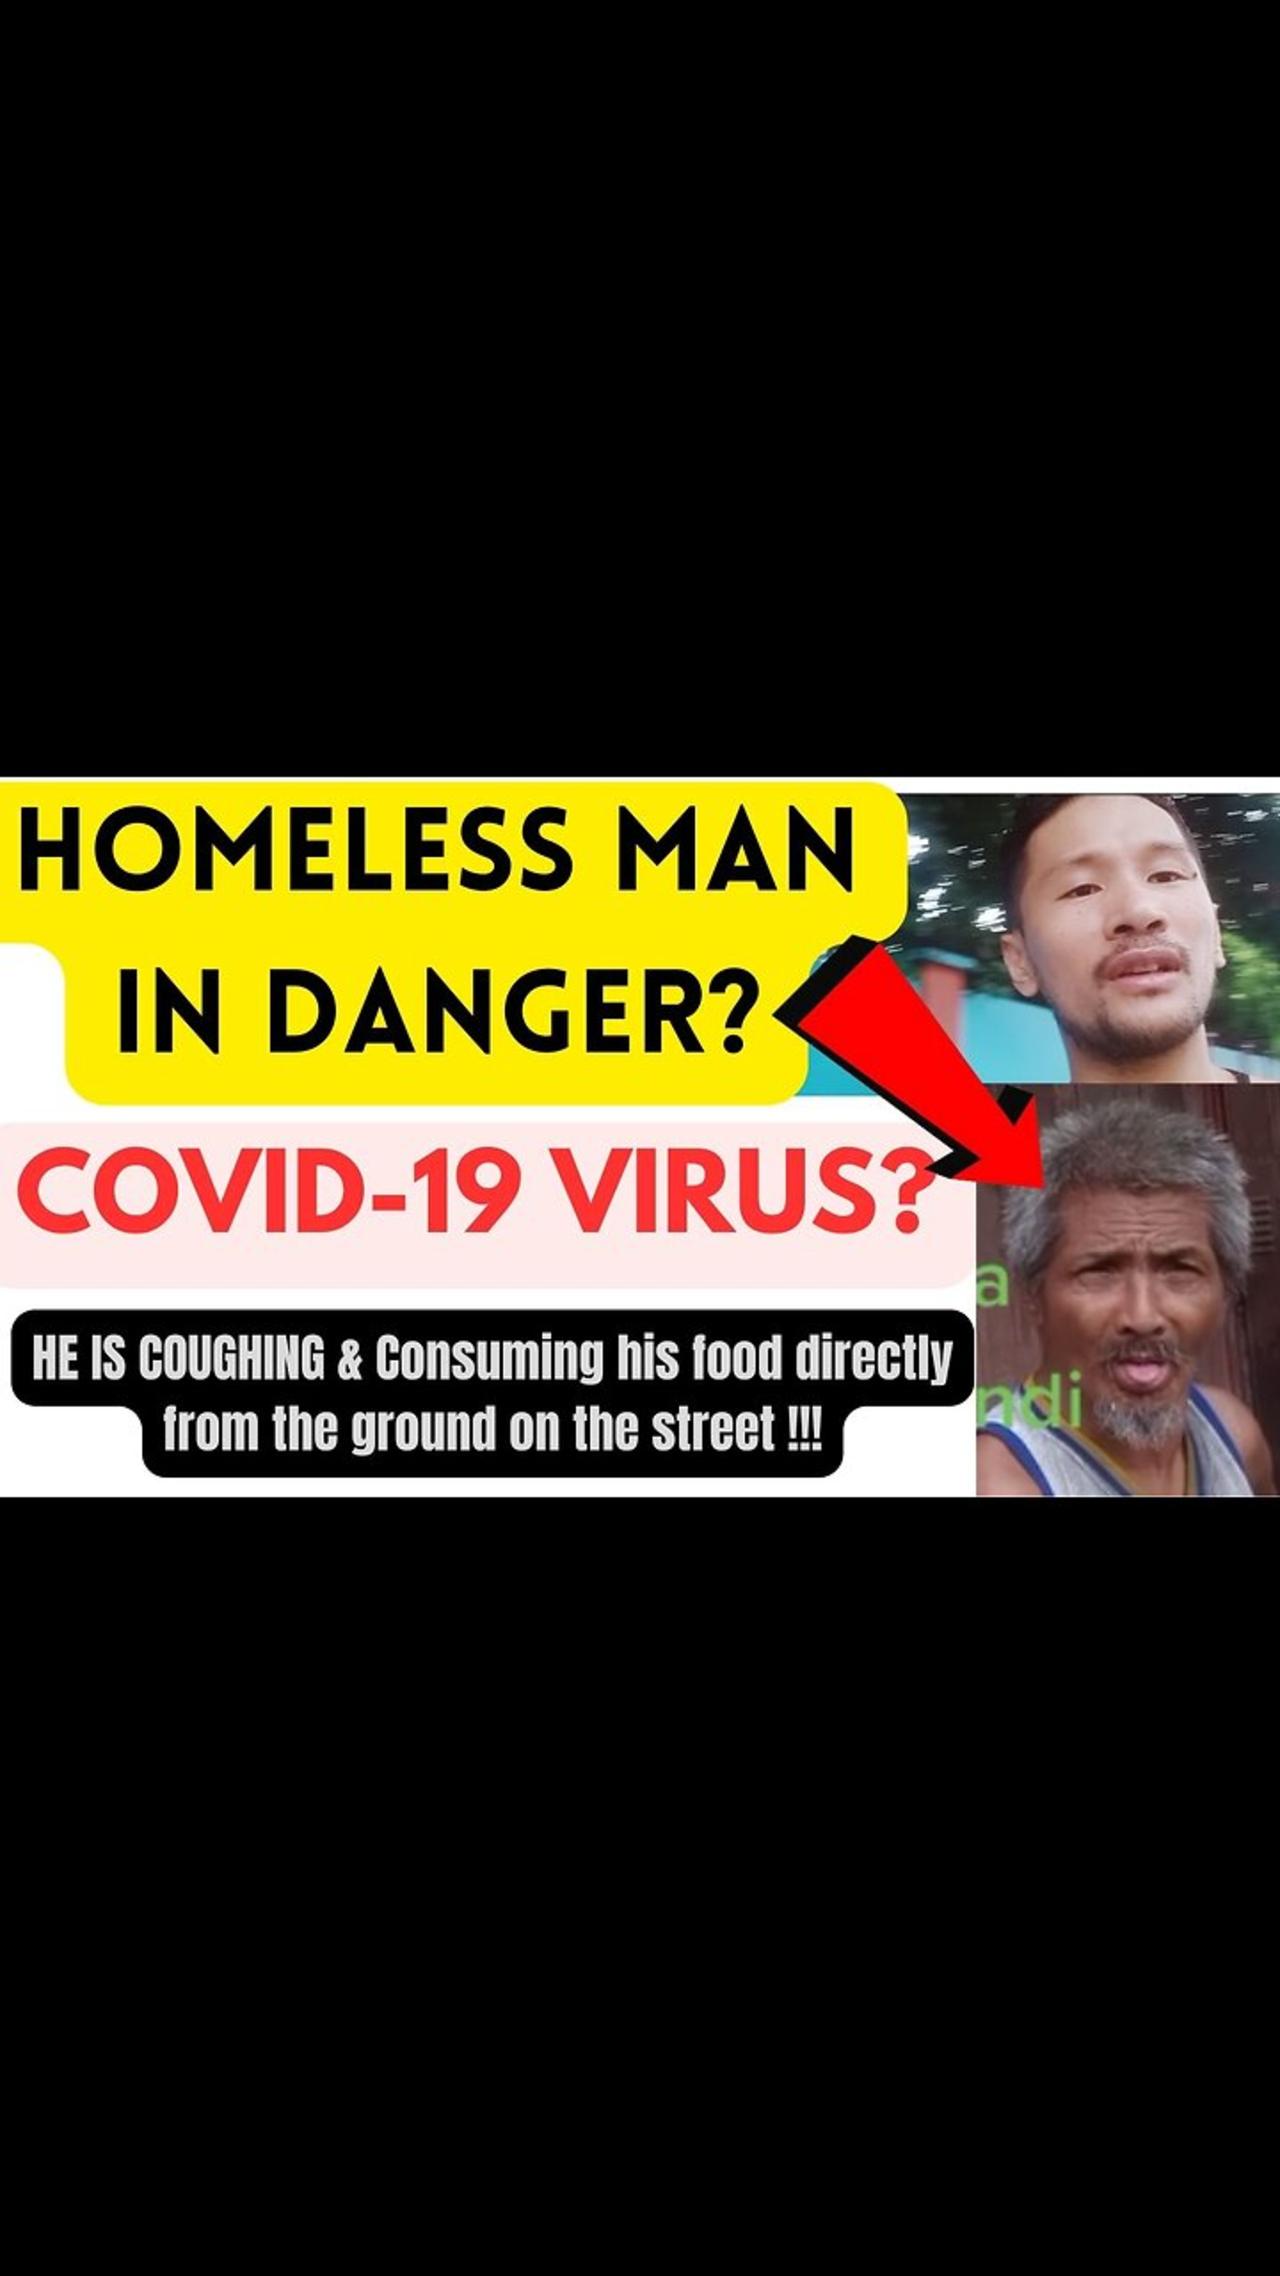 HOMELESS MAN in Danger? | COVID19 VIRUS | Consuming his food Directly from the sidewalk pavement!